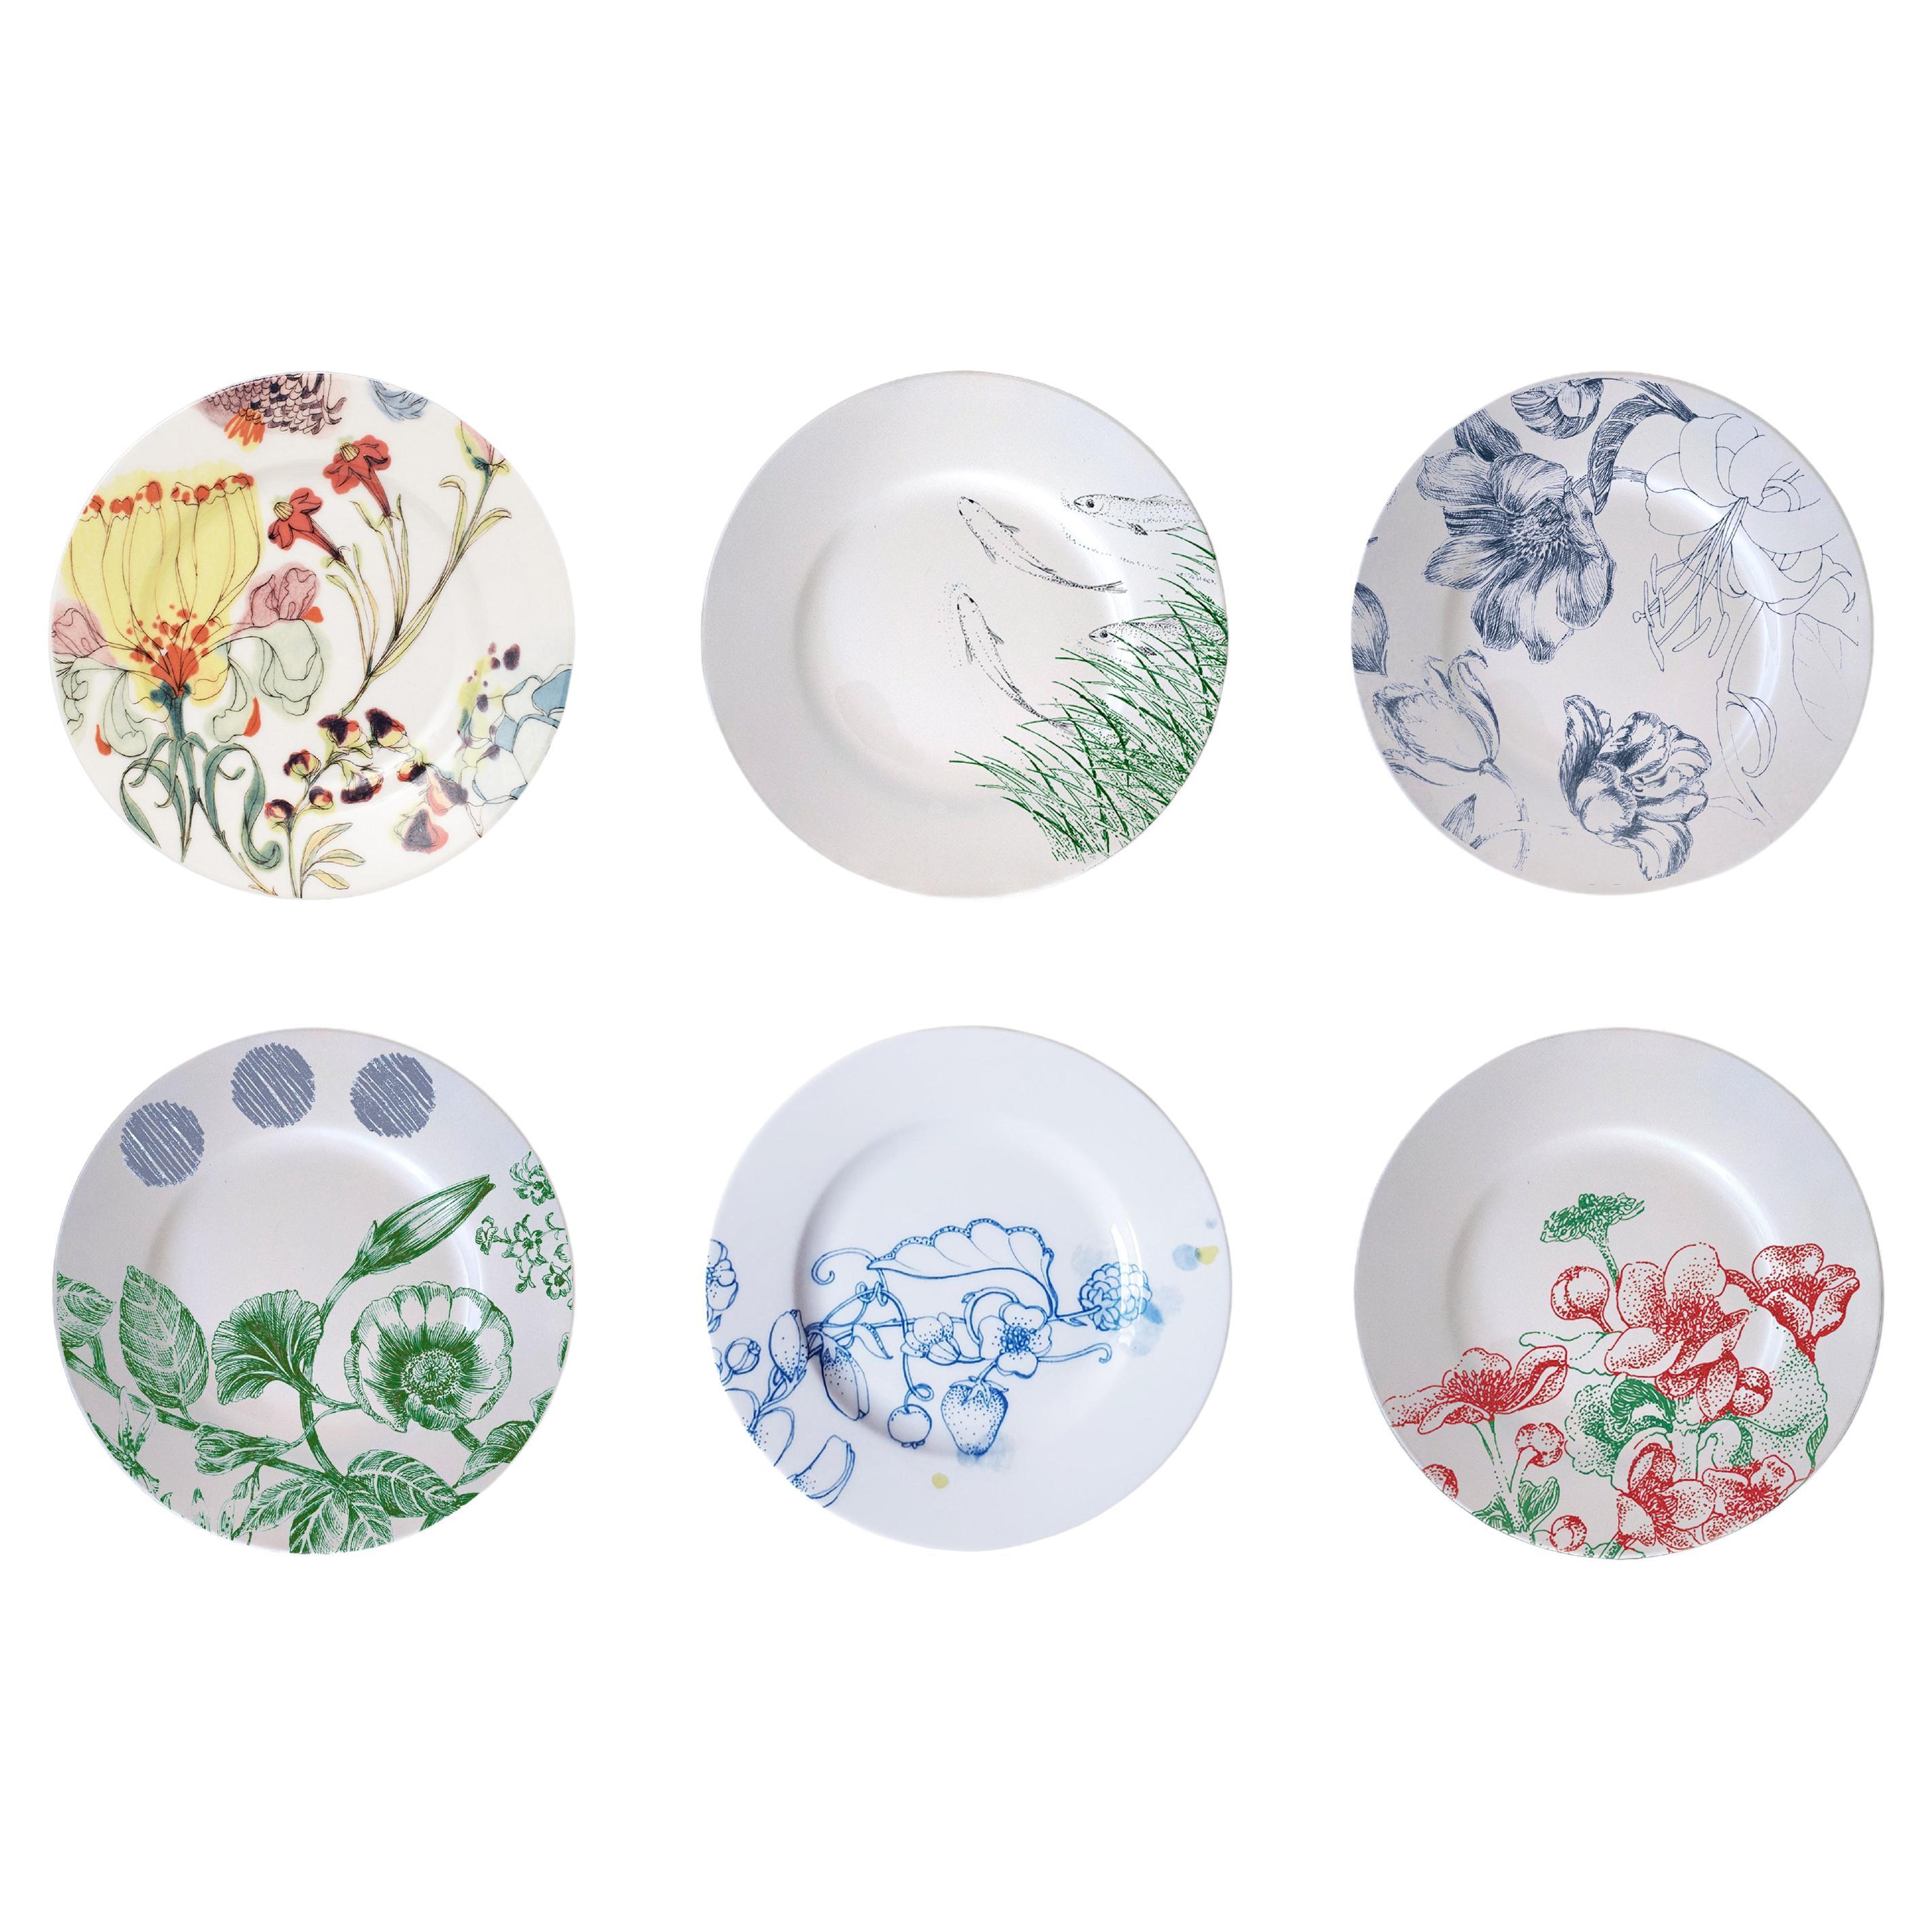 Mix & Match, Six Contemporary Porcelain Bread Plates with Multicolored Flowers For Sale